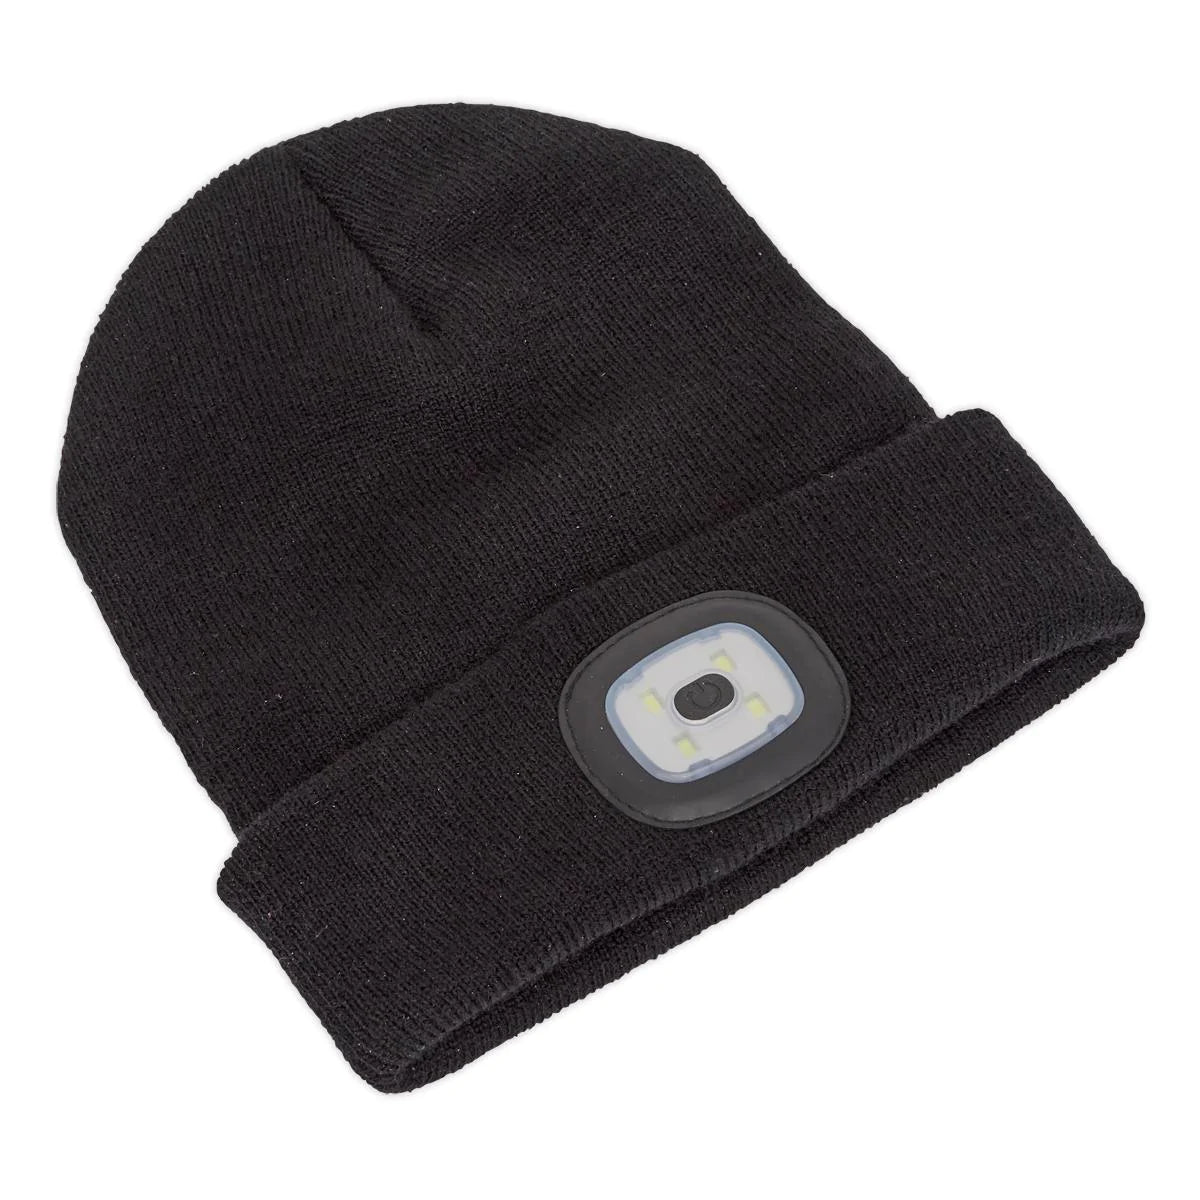 Beanie Hat 4 SMD LED USB Rechargeable